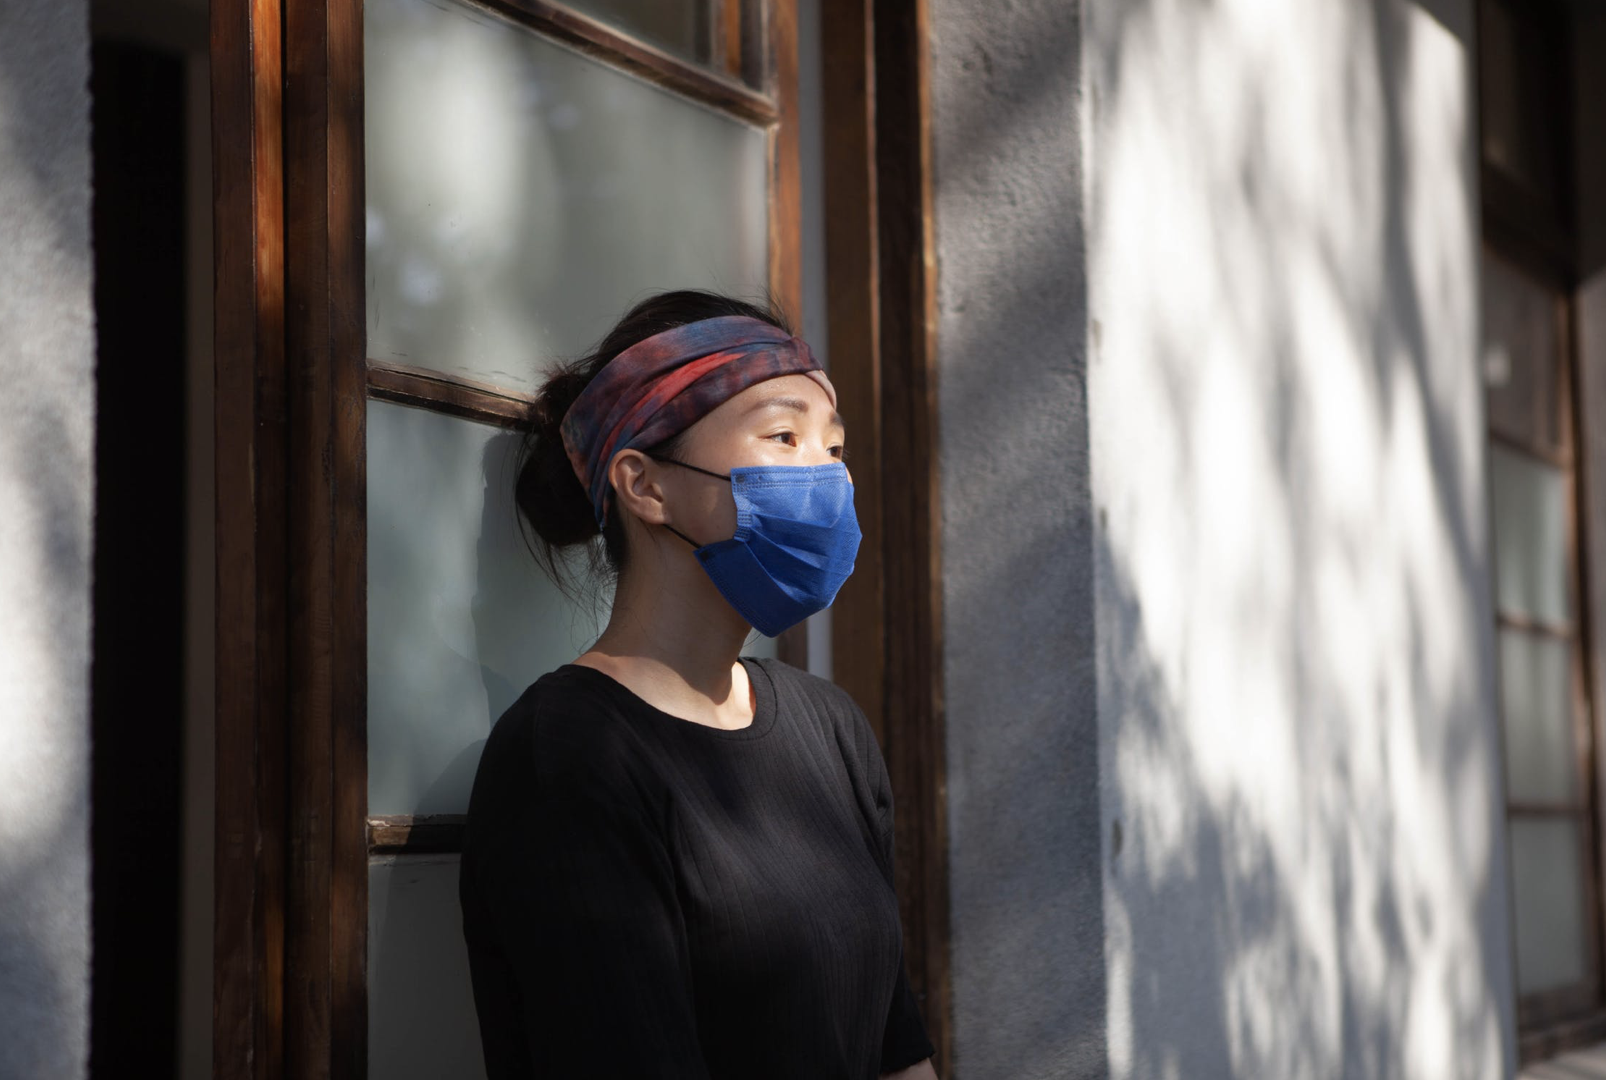 A woman wearing a black long sleeved shirt and a blue mask stands in front of a door way against a concrete building with light filtering on her face.